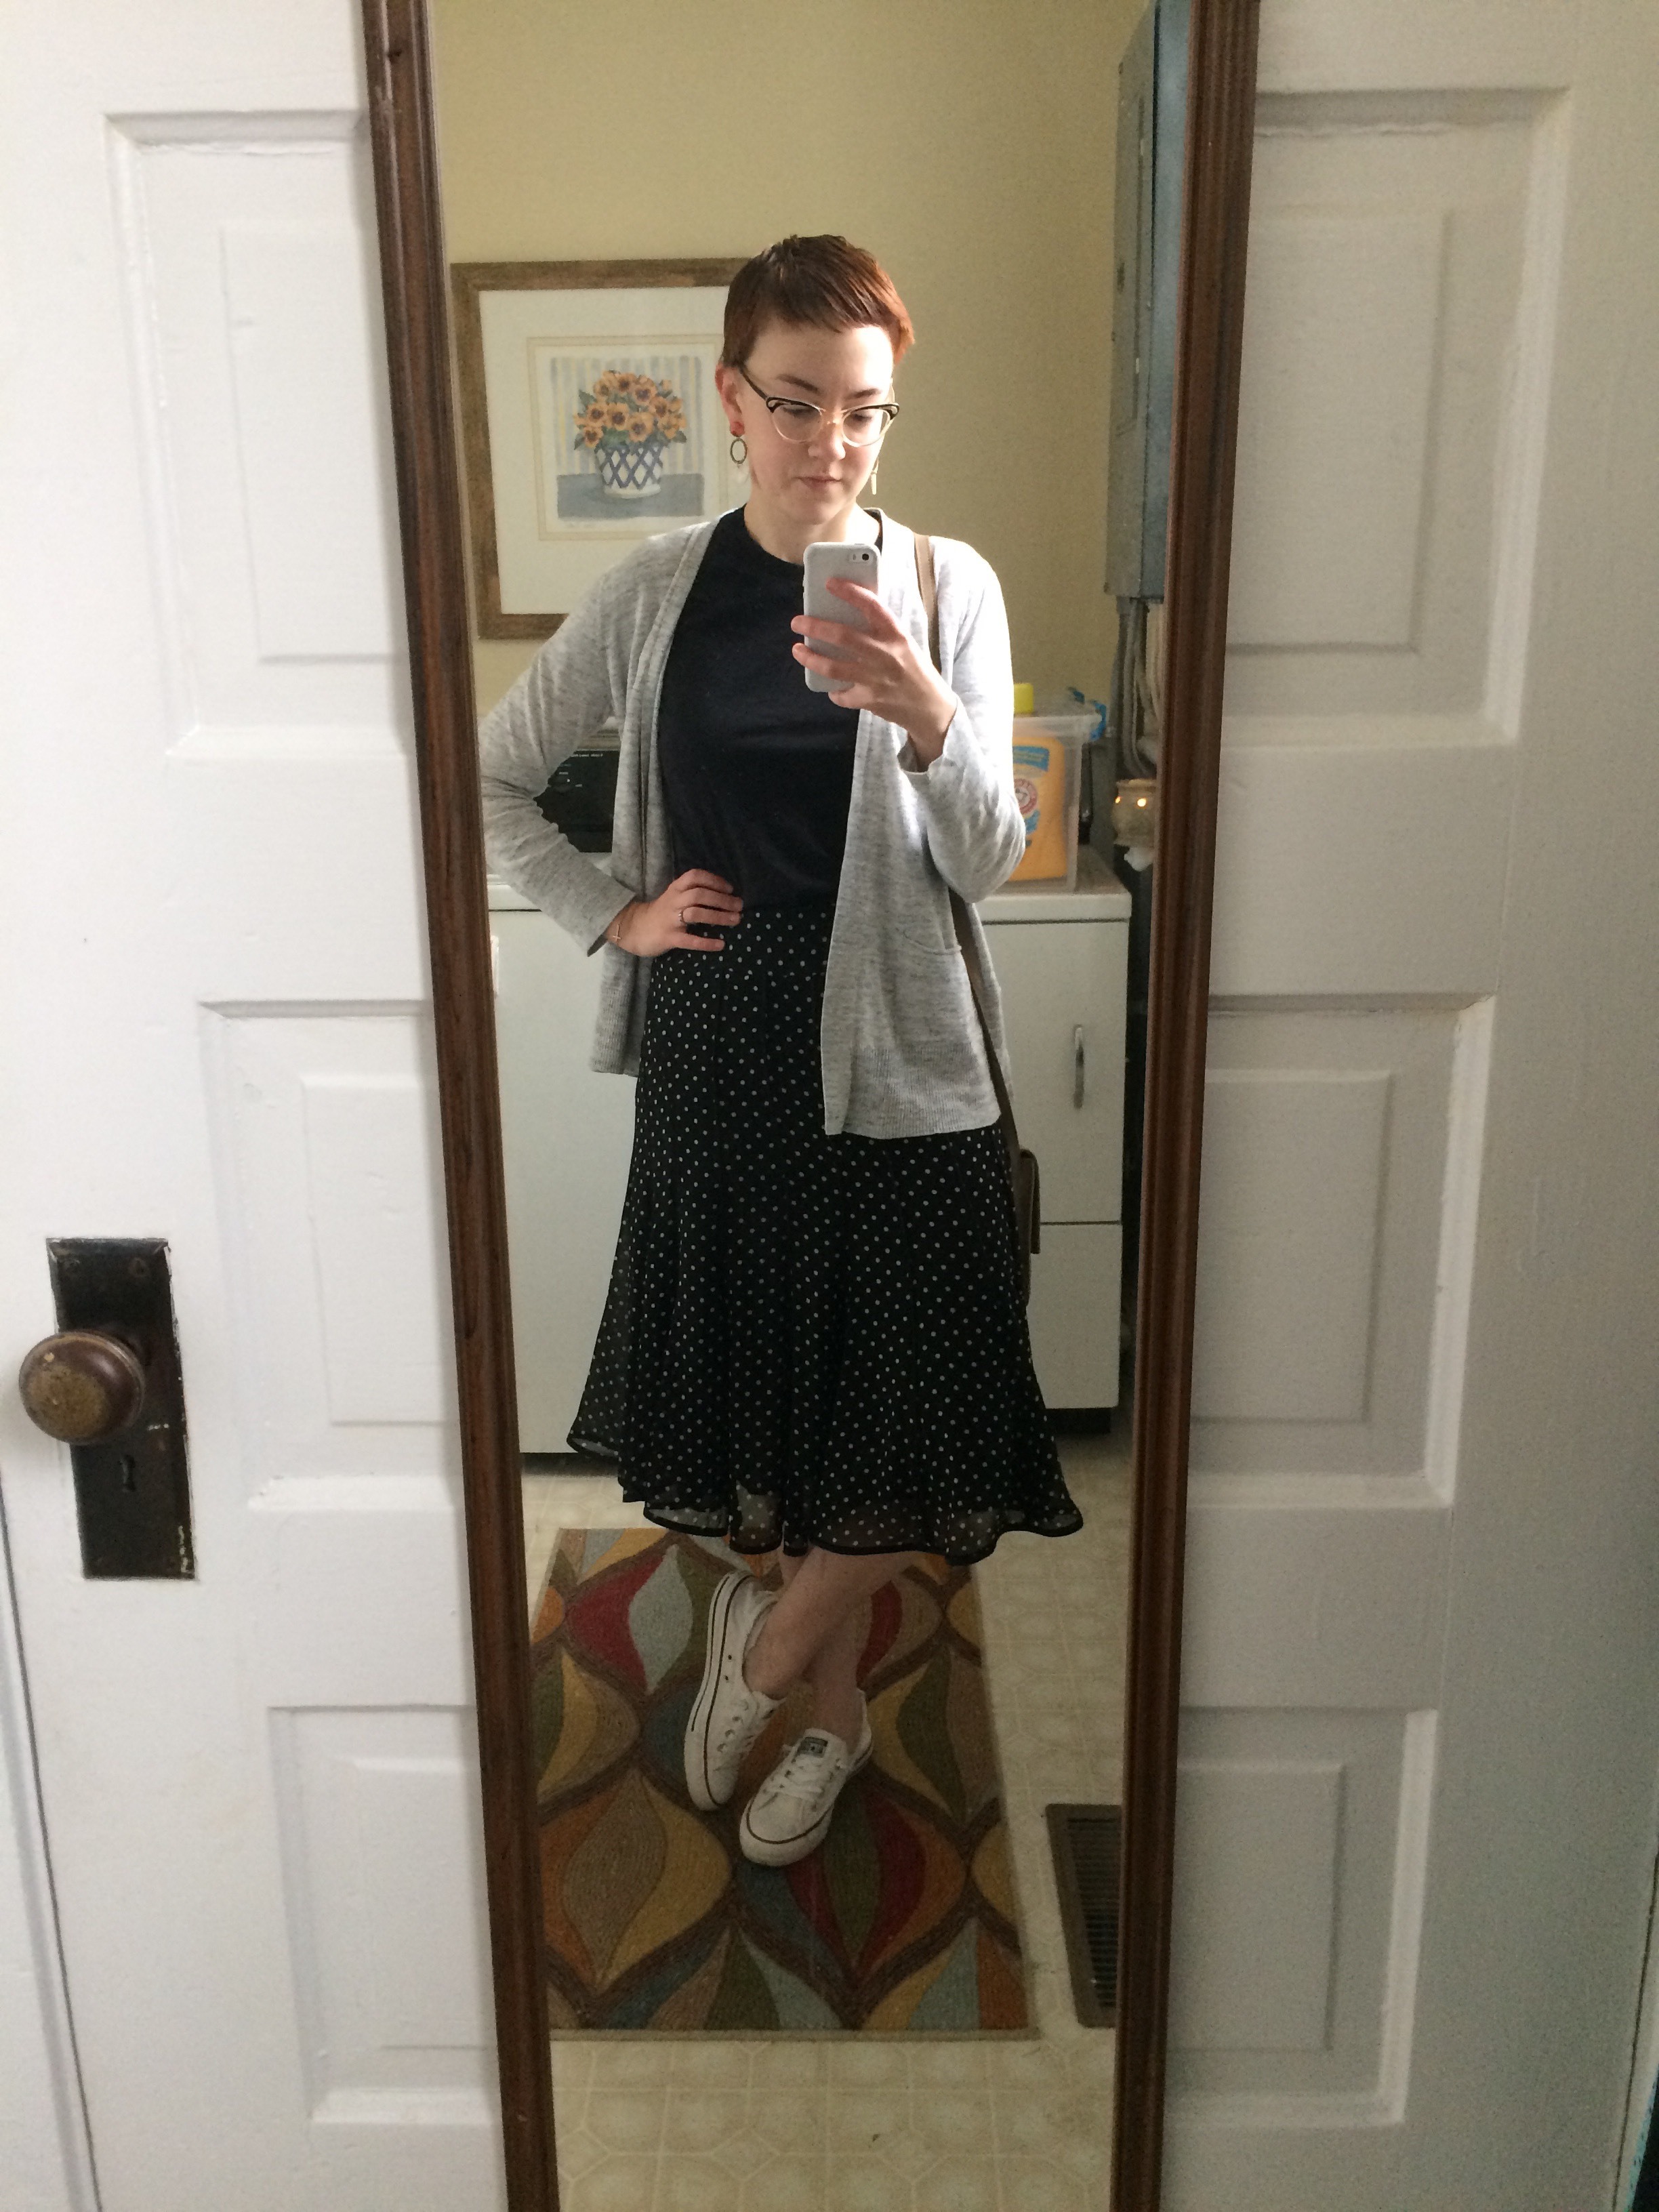  Outfit Three: Tee -  Everlane Crew Neck ; Skirt, Cardigan, and Shoes - thrifted; Earrings - c/o  ABLE  